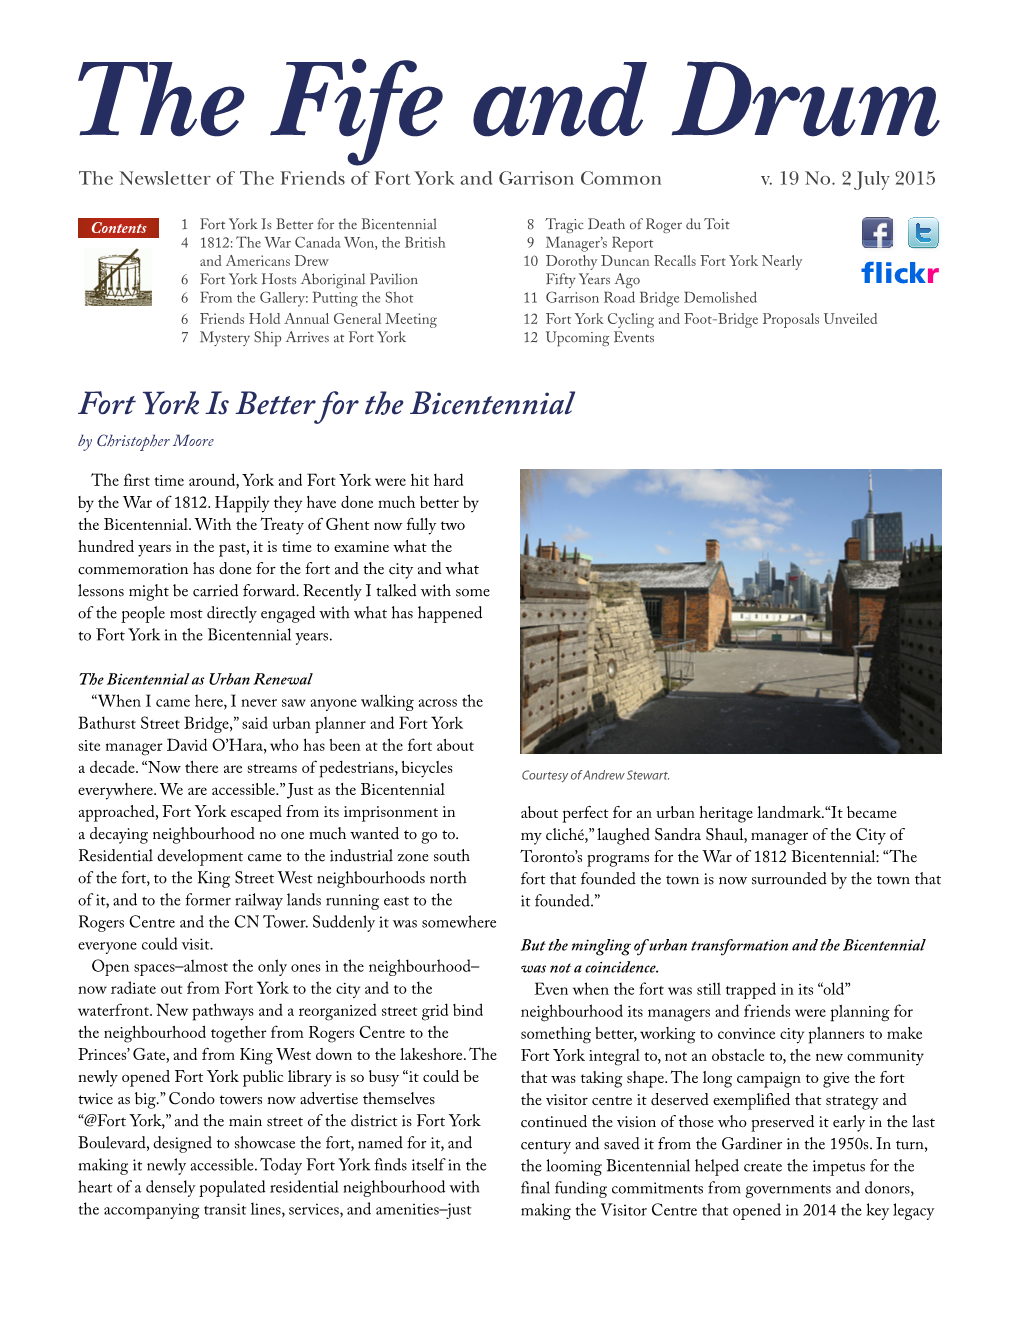 The Fife and Drum, July 2015, V. 19 No. 2